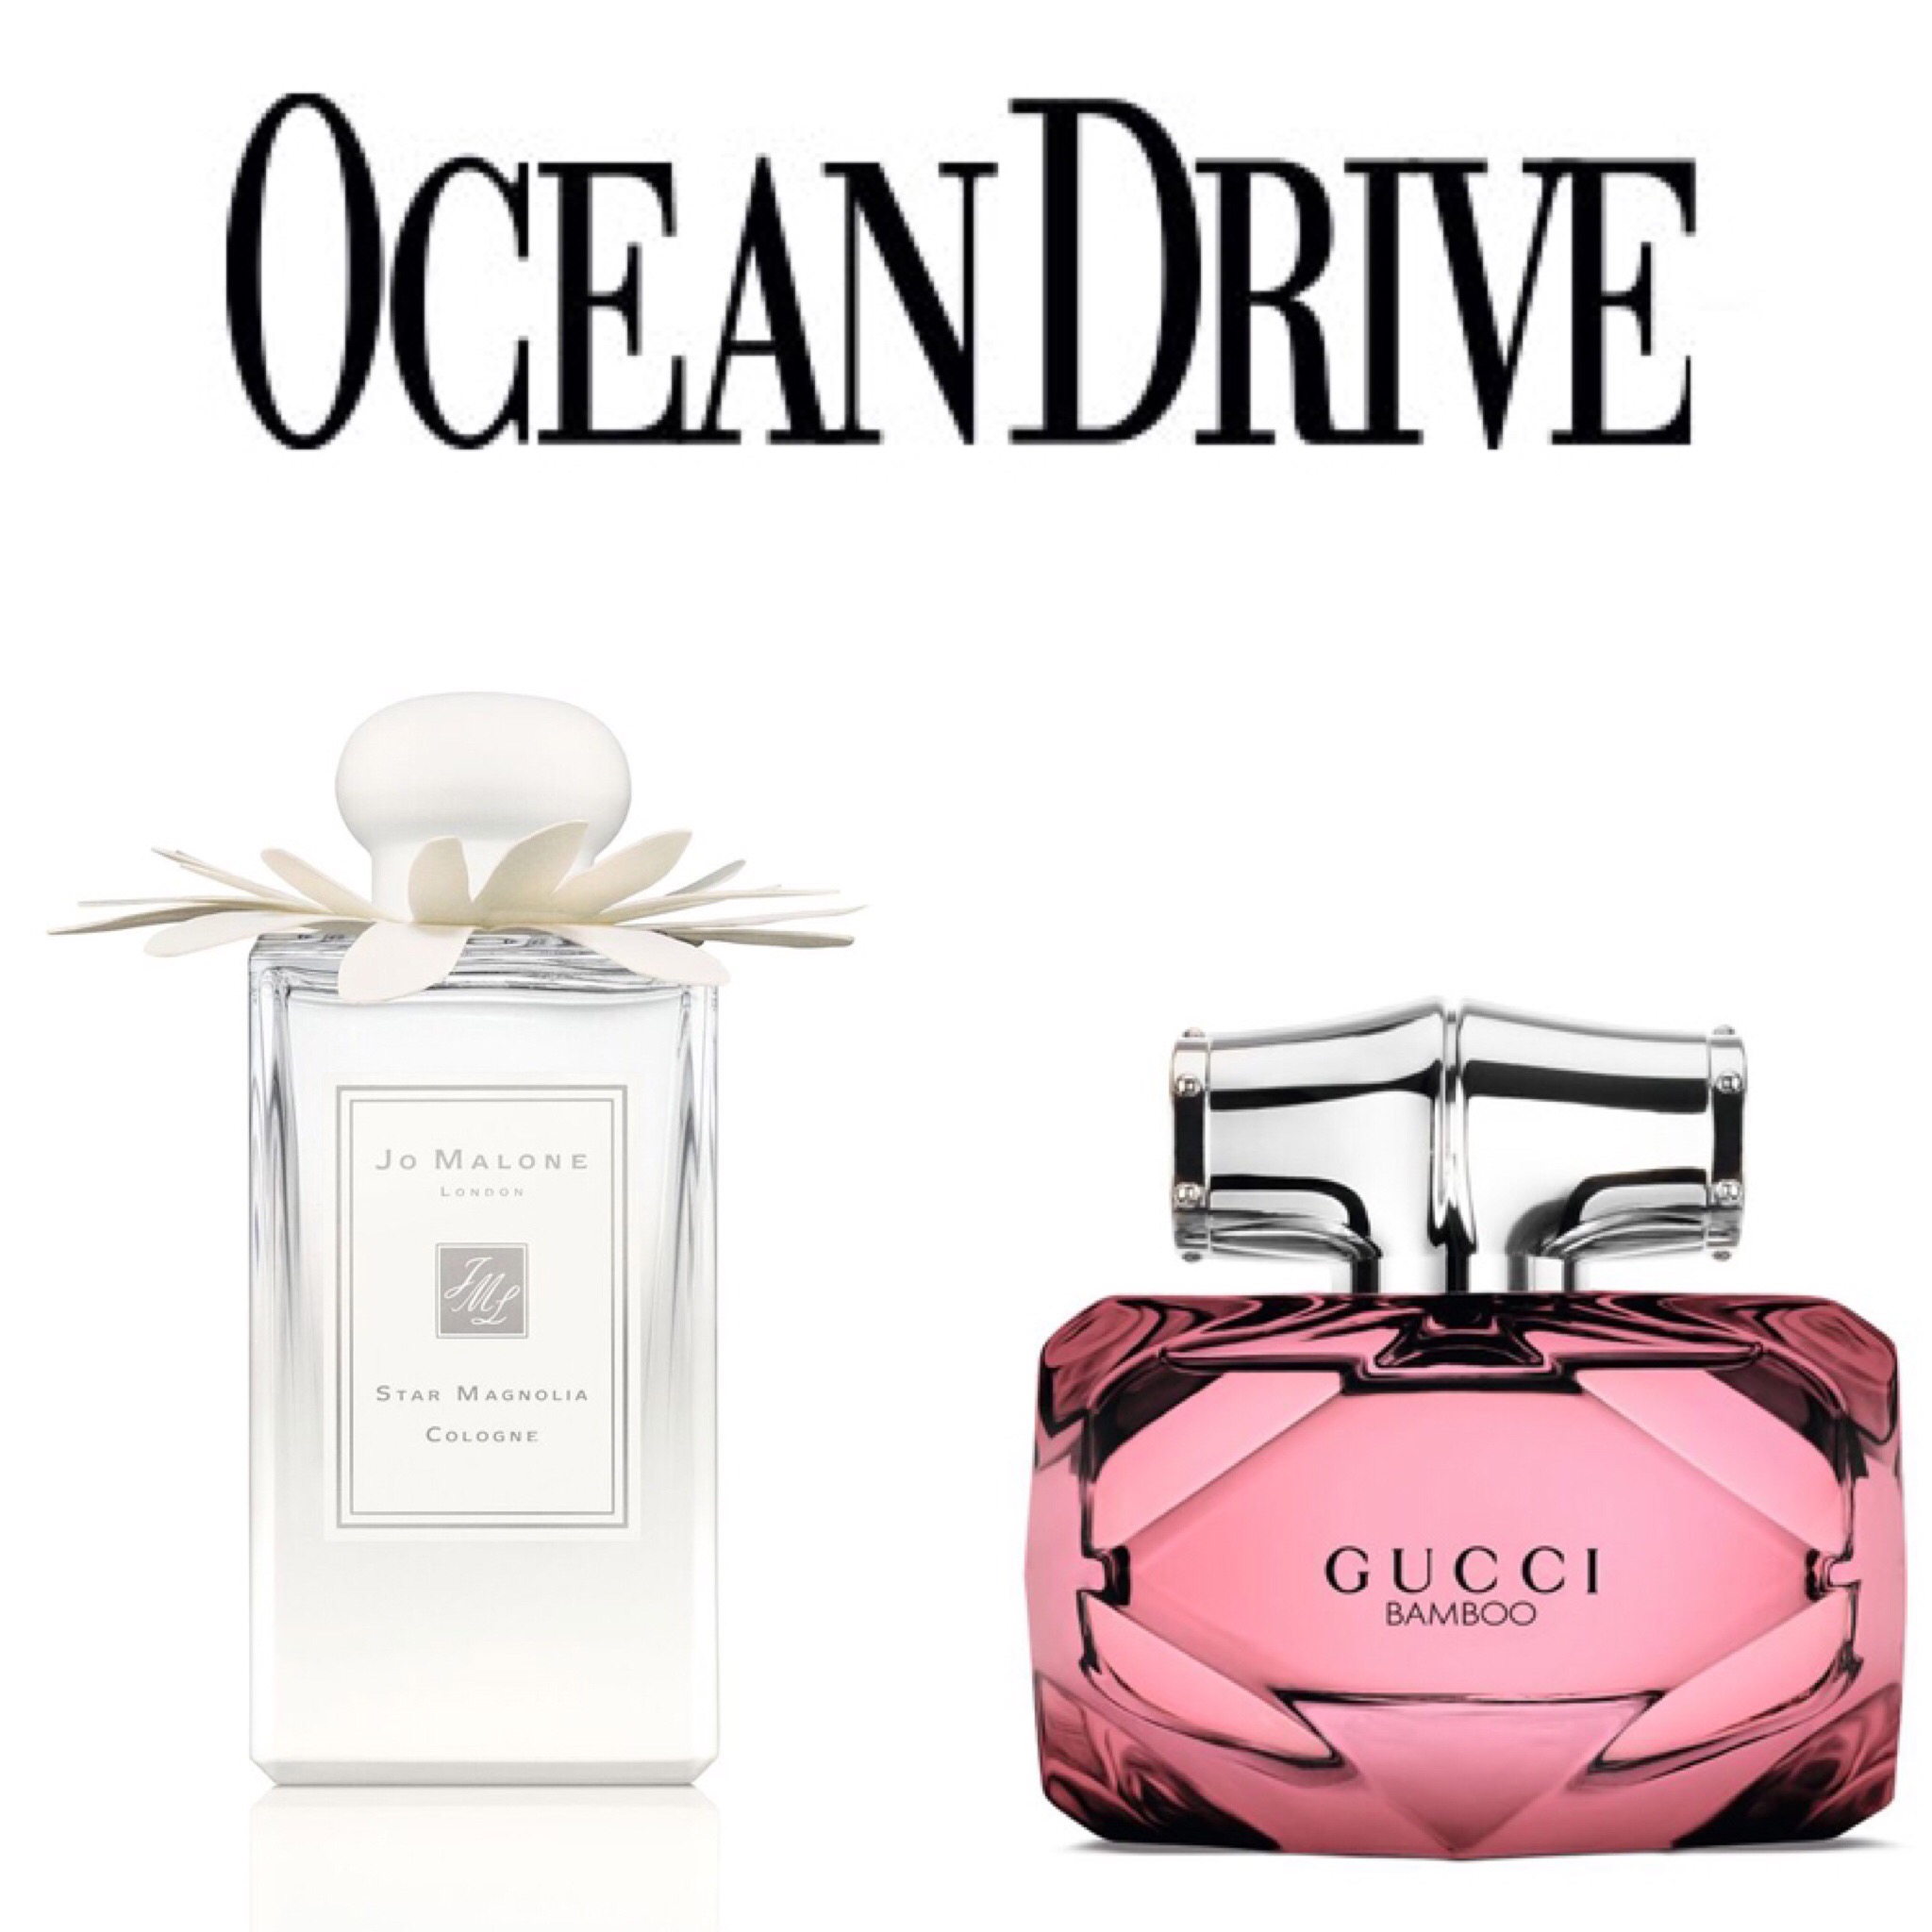  https://oceandrive.com/beautiful-fragrances-to-wear-in-the-springtime 